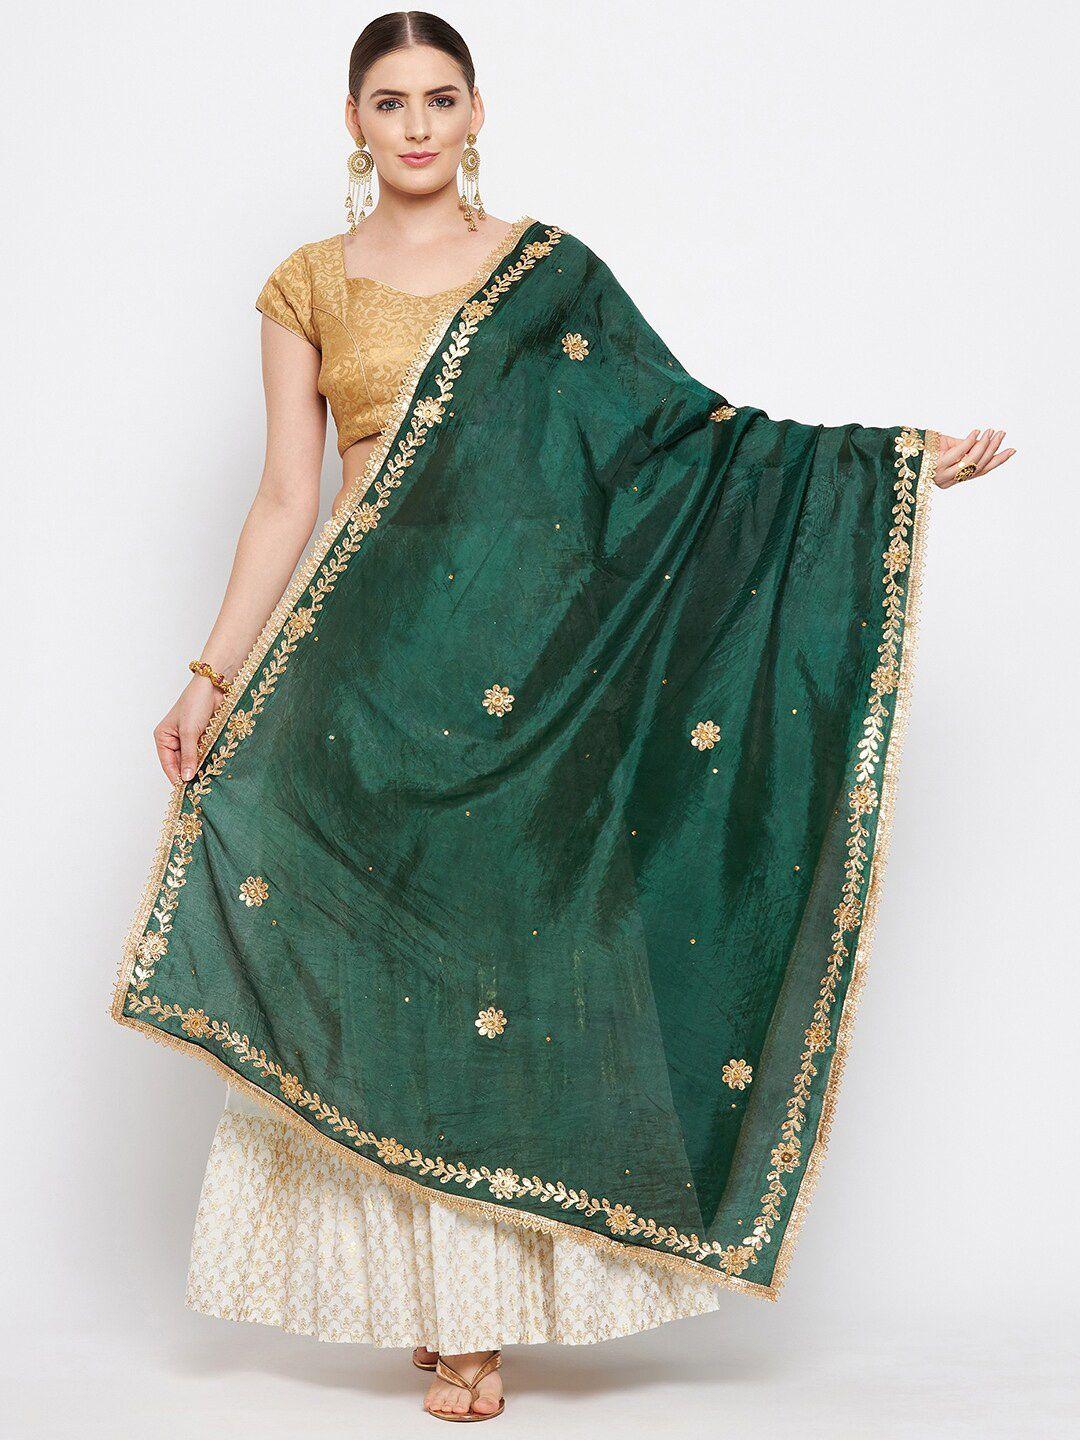 clora-creation-green-&-gold-toned-embroidered-dupatta-with-beads-and-stones